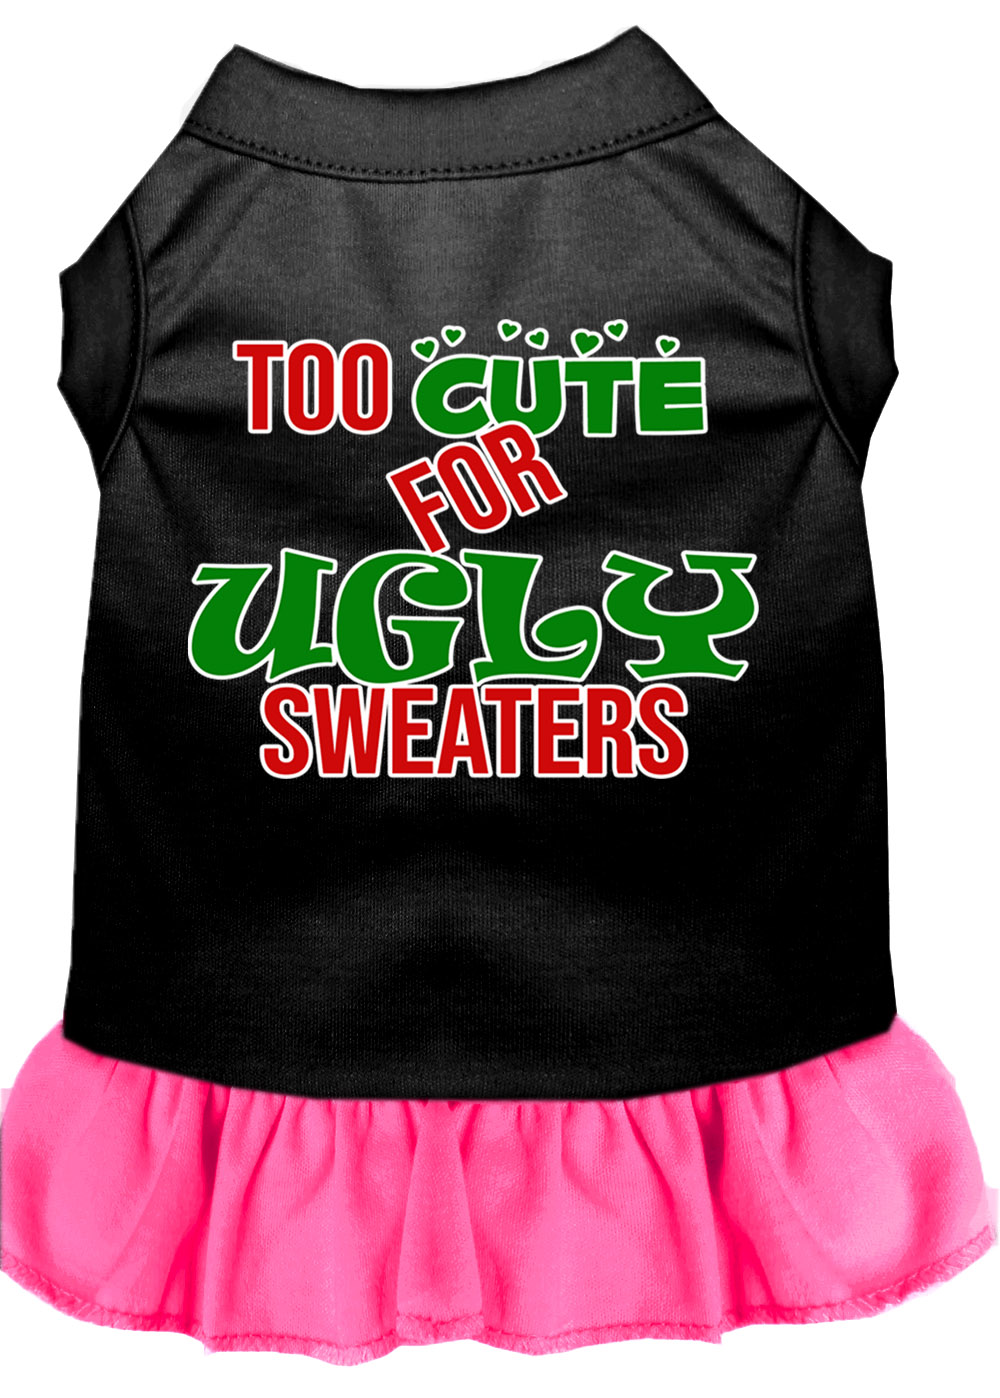 Too Cute for Ugly Sweaters Screen Print Dog Dress Black with Bright Pink Med